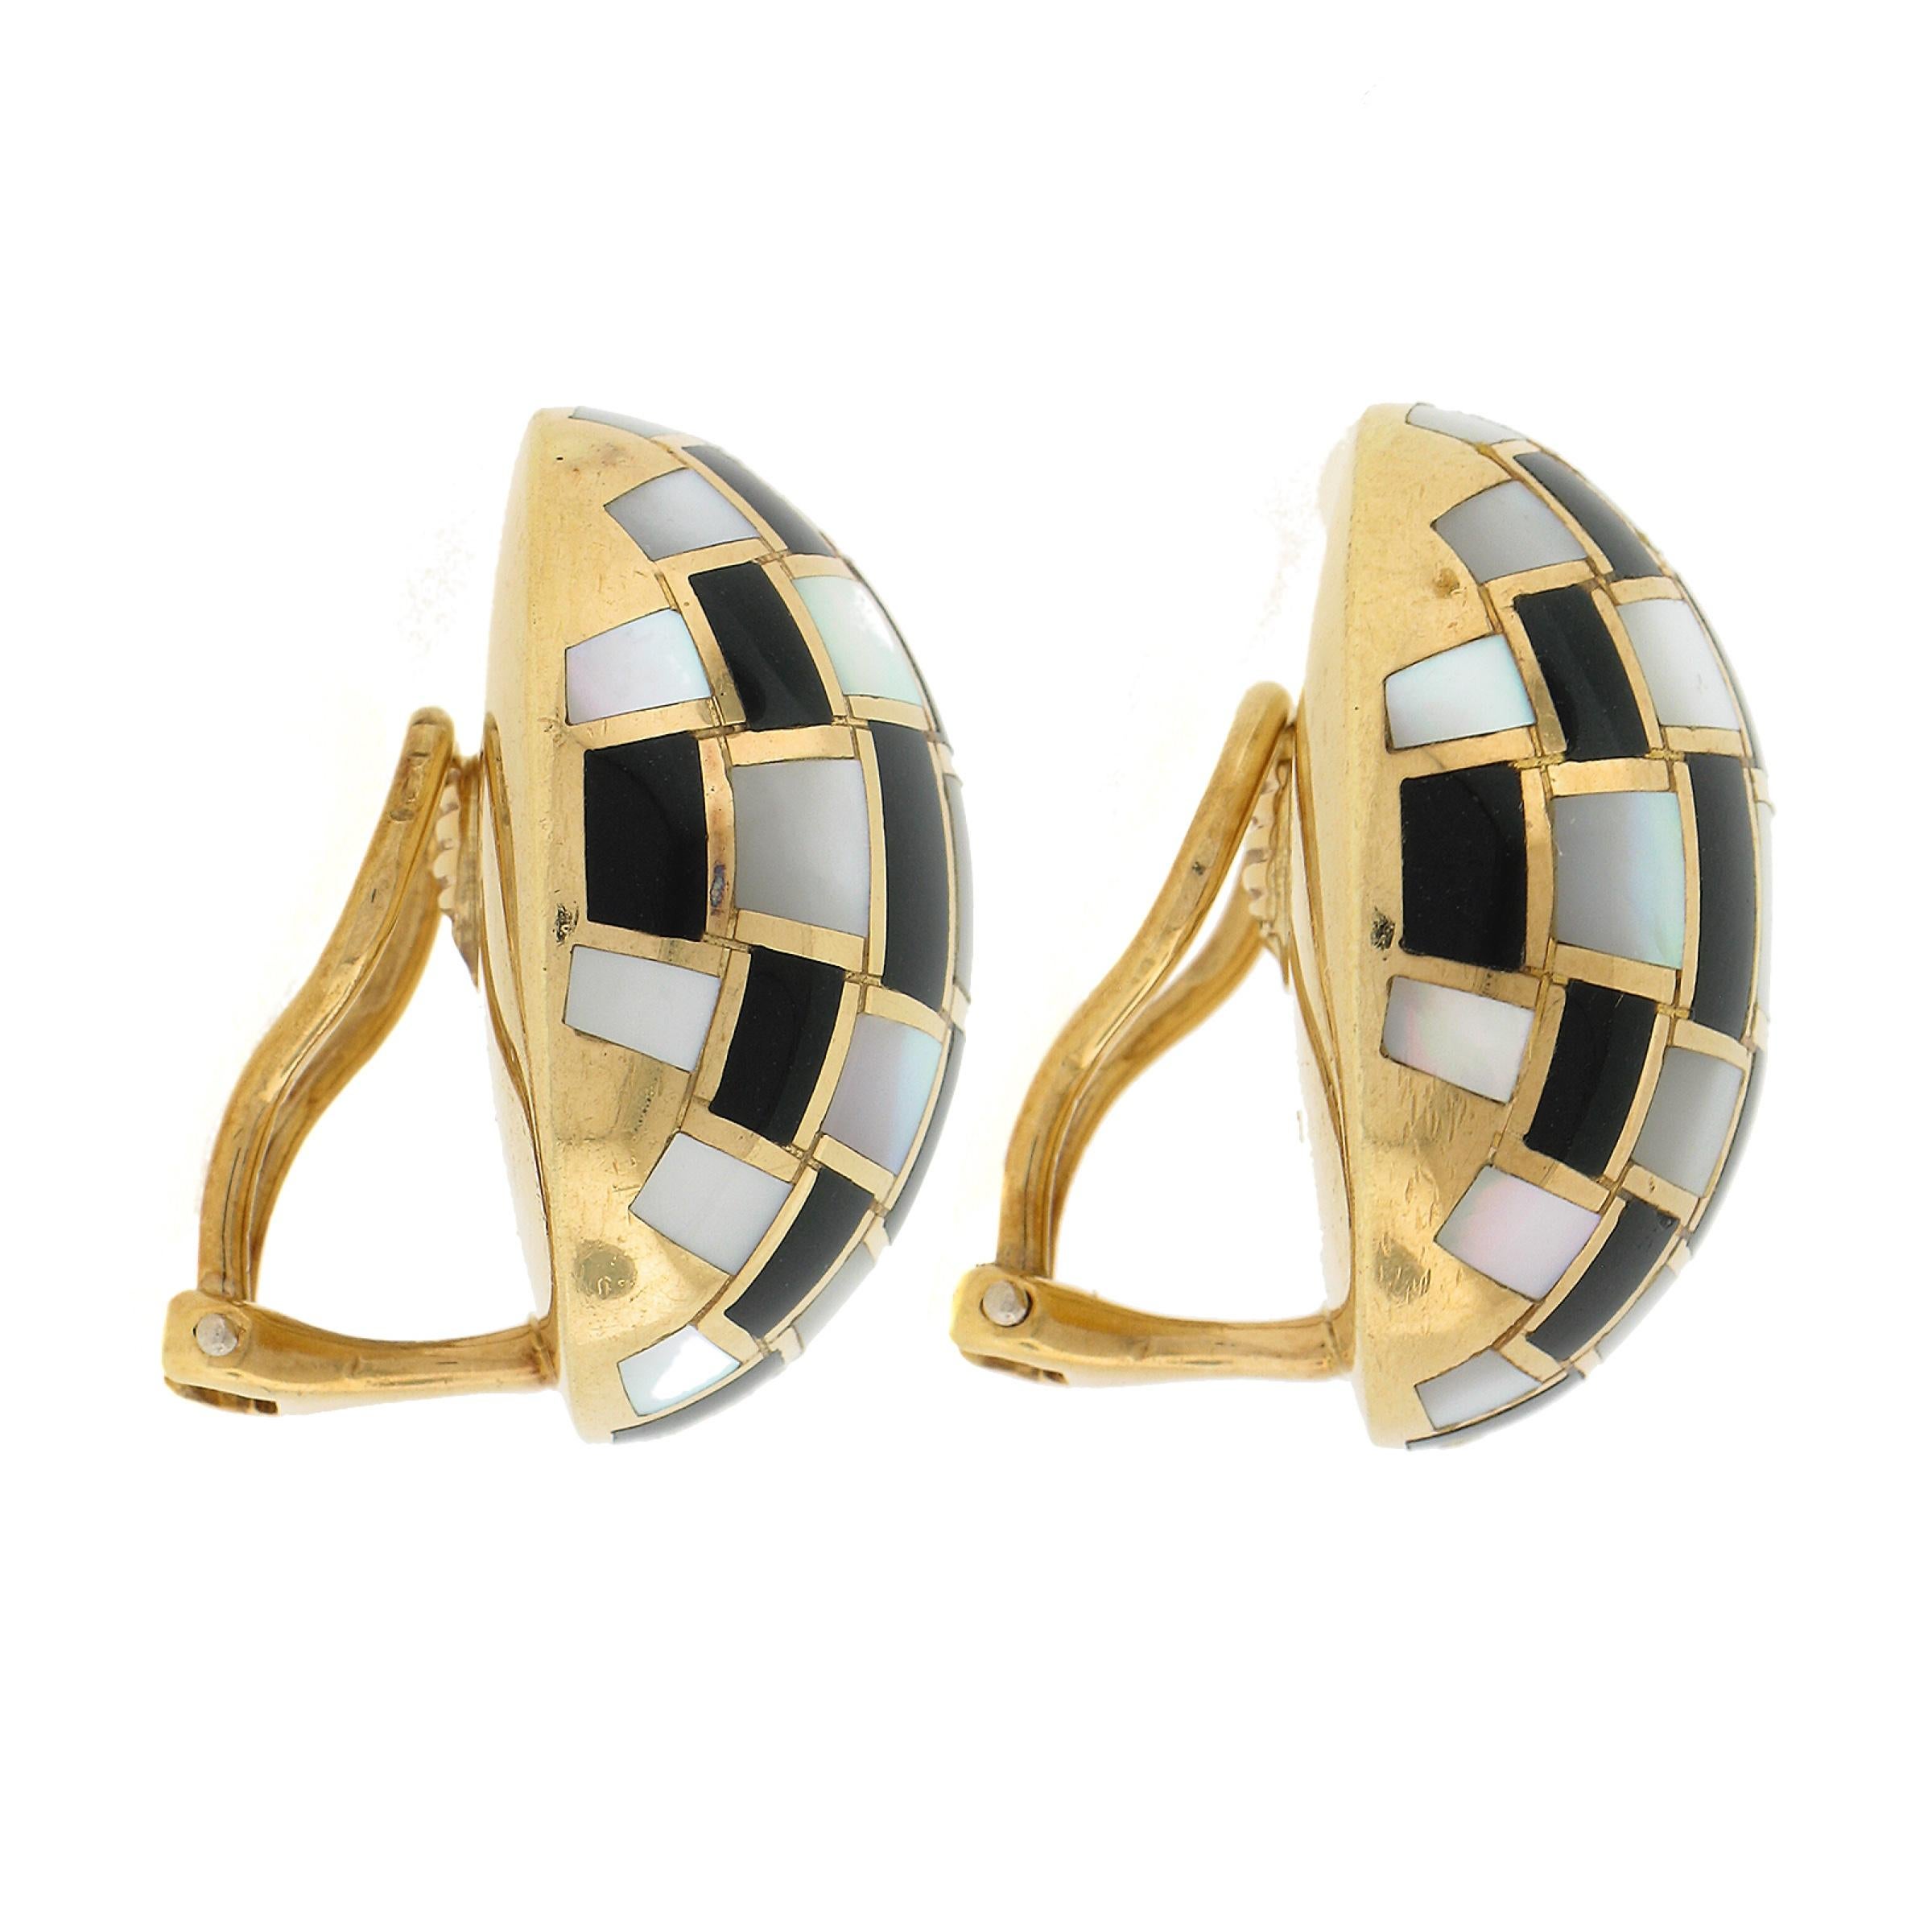 Square Cut Tiffany & Co. 18k Gold Inlaid Black Onyx & Mother of Pearl Checkerboard Earrings